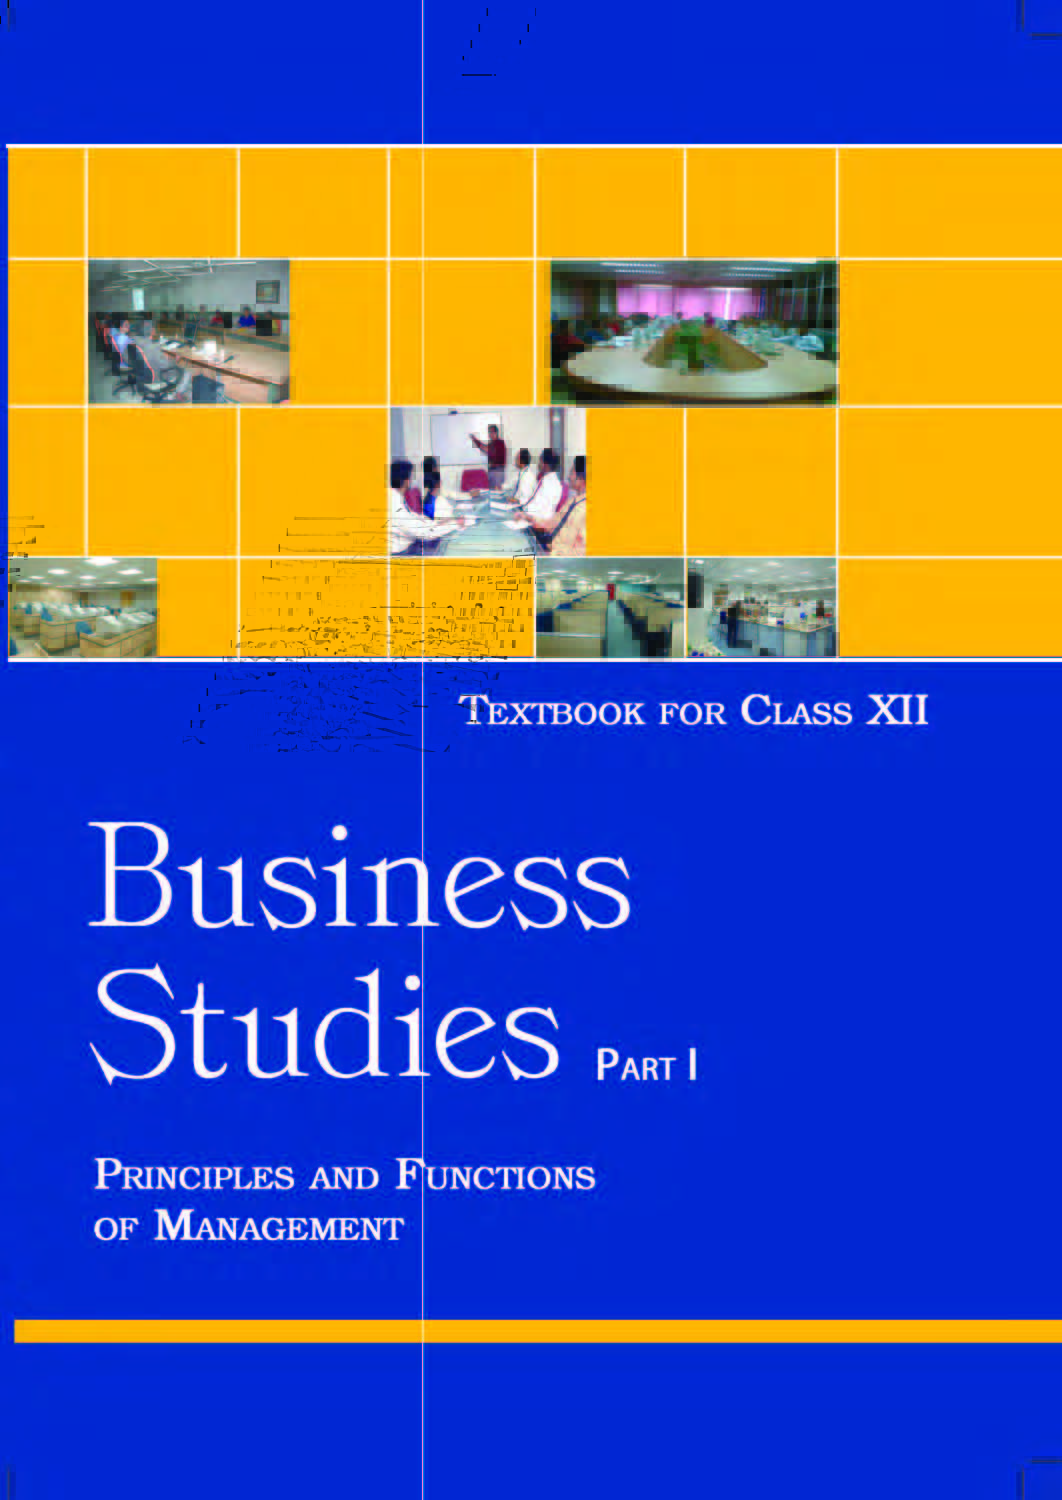 case study book for bst class 12